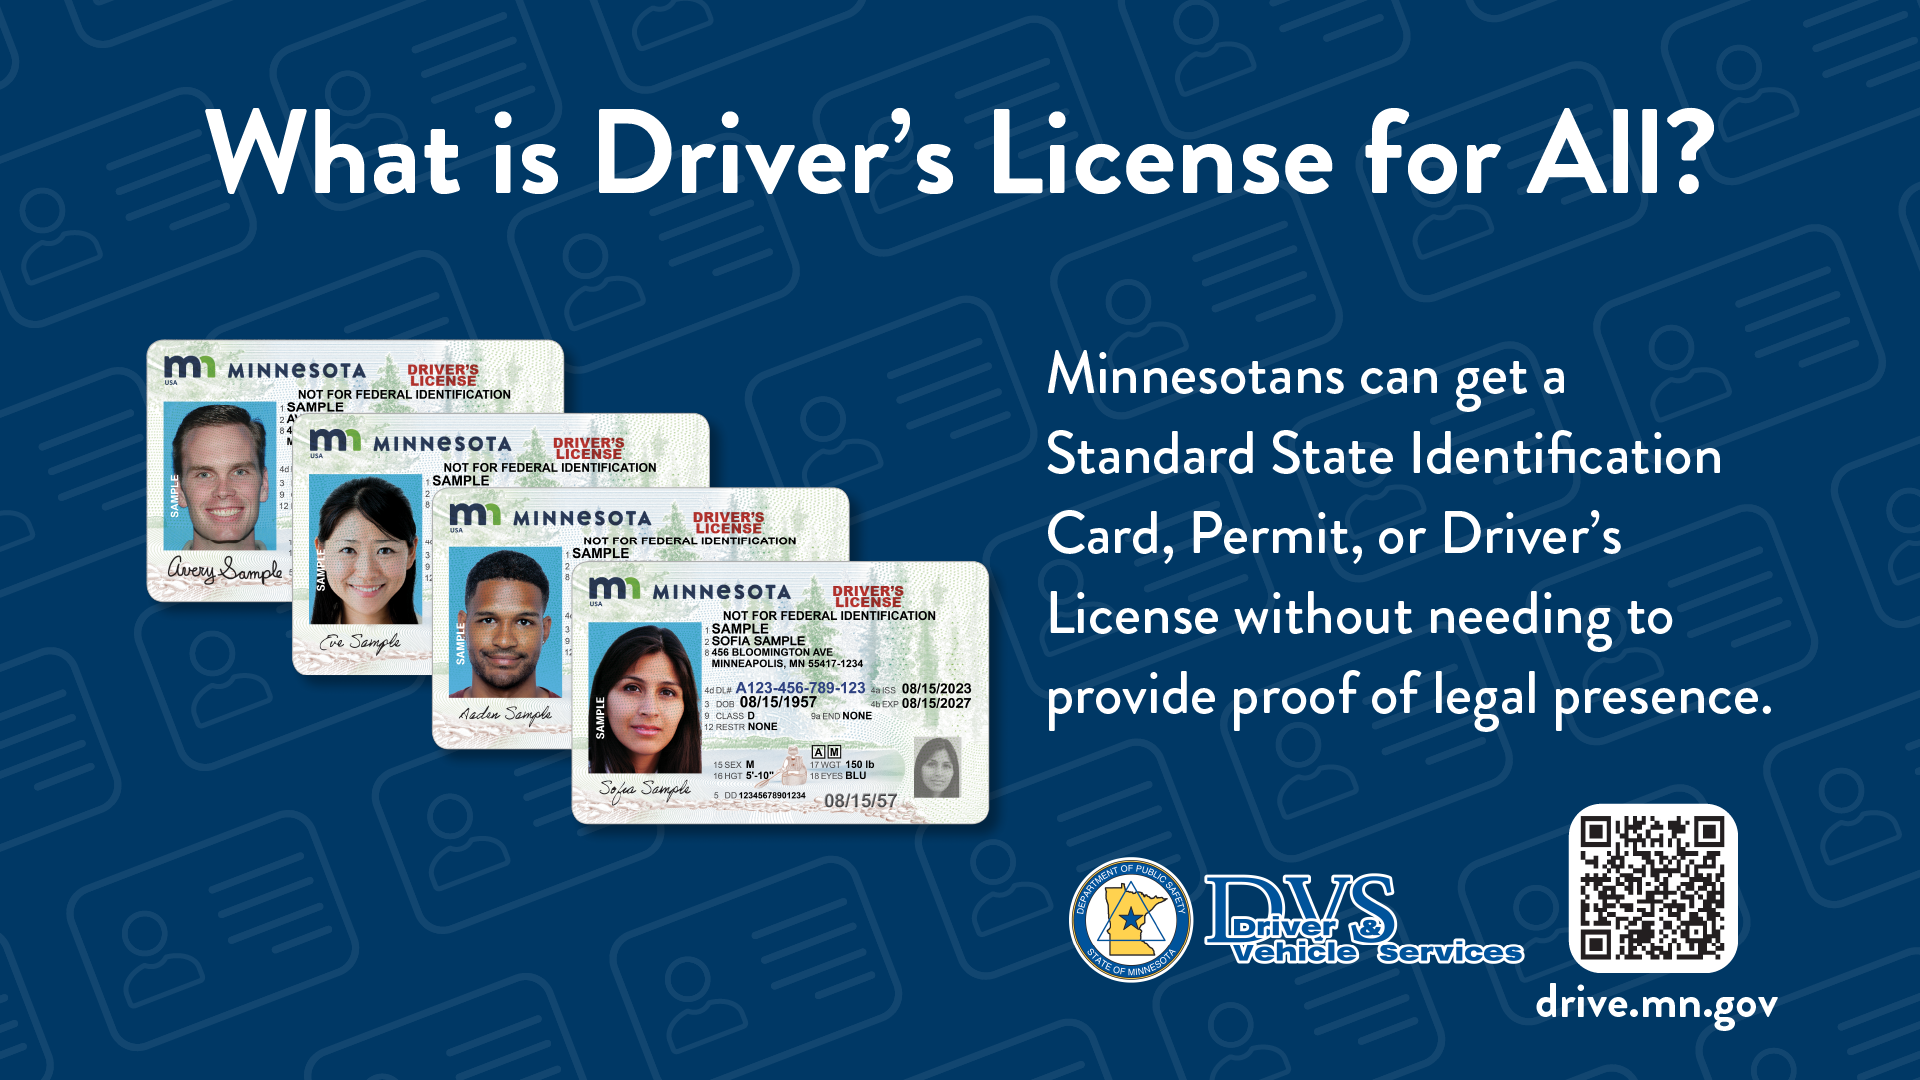 driver license required documents